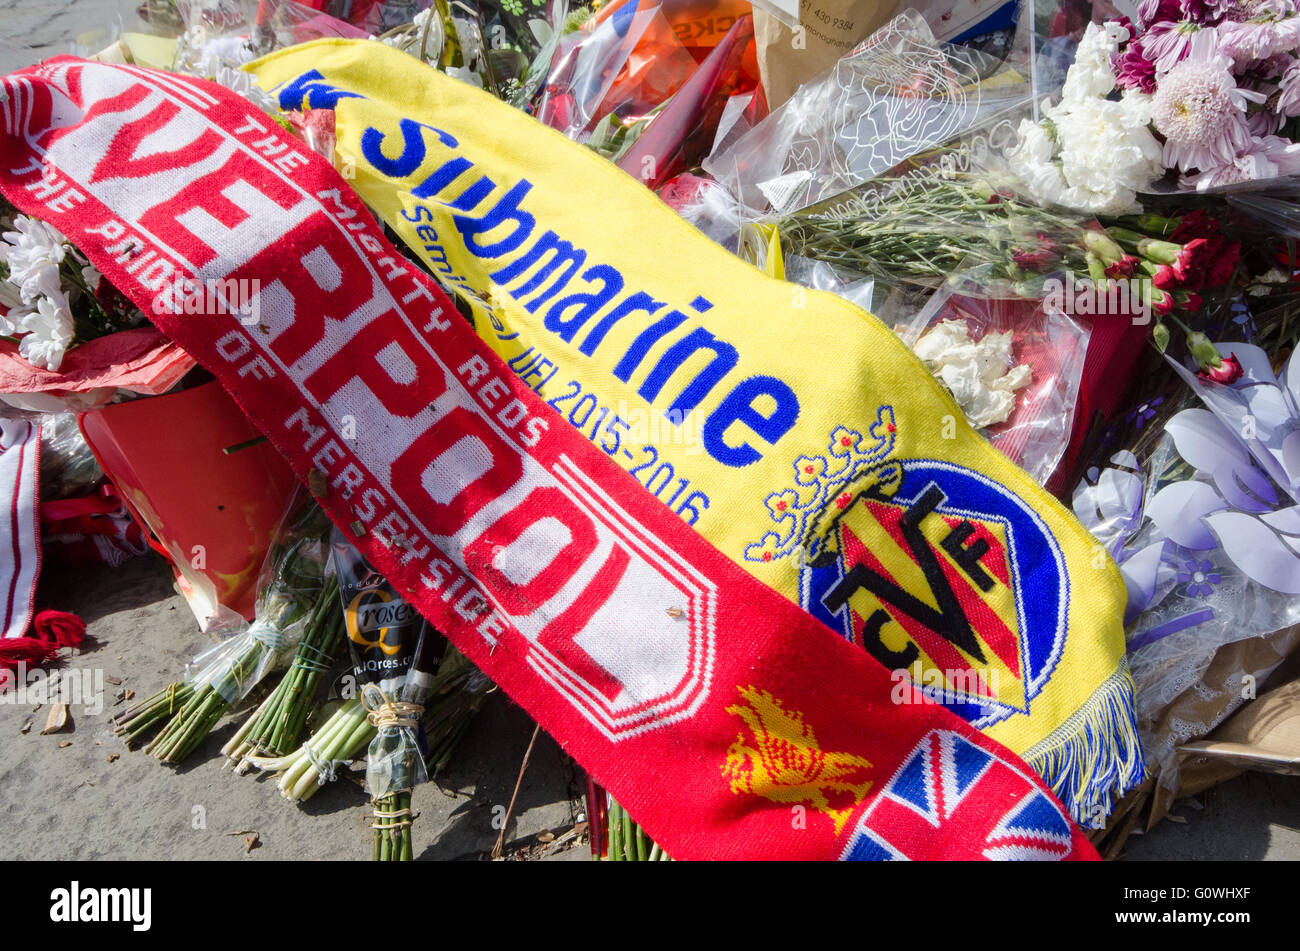 Liverpool, UK. 5th May, 2016. After the momentous decision last month following the Hillsborough inquest, Liverpool face Spanish side Villareal in the semi-final of the UEFA Europa League tonight. As fans mingle together in the warm spring sunshine in Liverpool, Villareal paid their respects by placing scarves at the Hillsborough memorial monument near St.John’s Gardens in the city centre. The winner will play either Sevilla or Shakt Donsk in the final in Basel, Switzerland on 18th May 2016 Credit:  rsdphotography/Alamy Live News Stock Photo